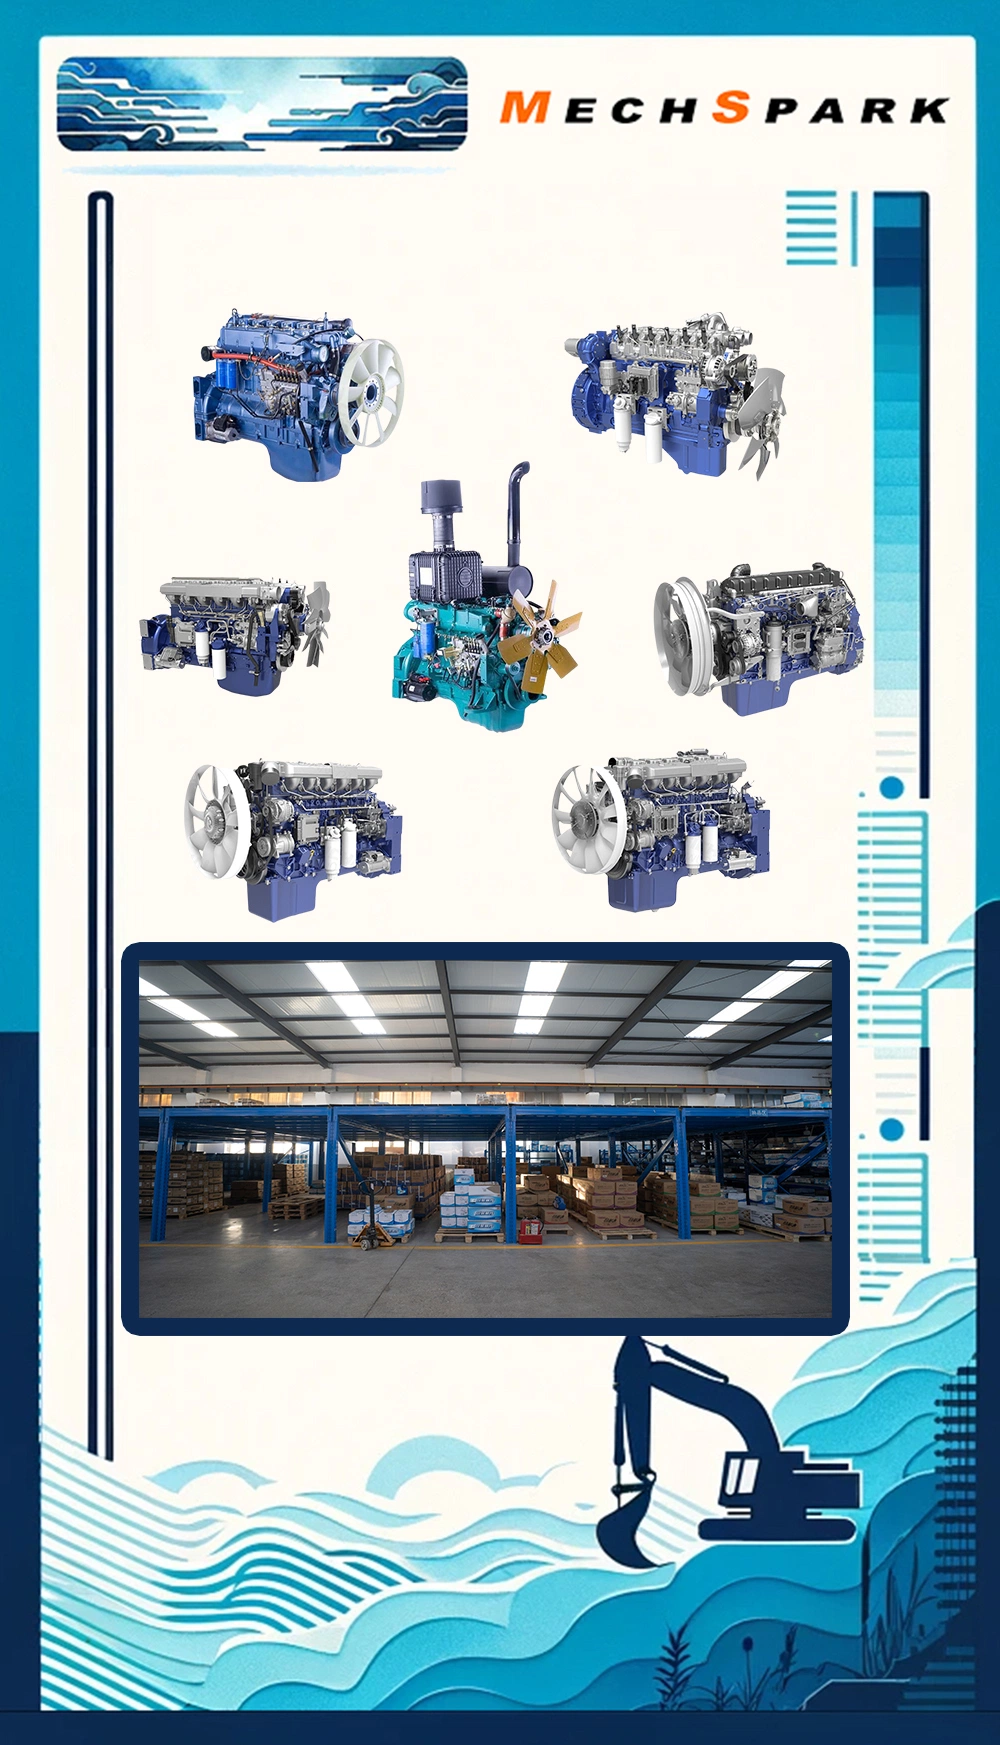 Wp13 Wechai Engine Parts for Sinotruk HOWO Trucks and Marine Engines, Including Generator and Diesel Engine Spare Parts